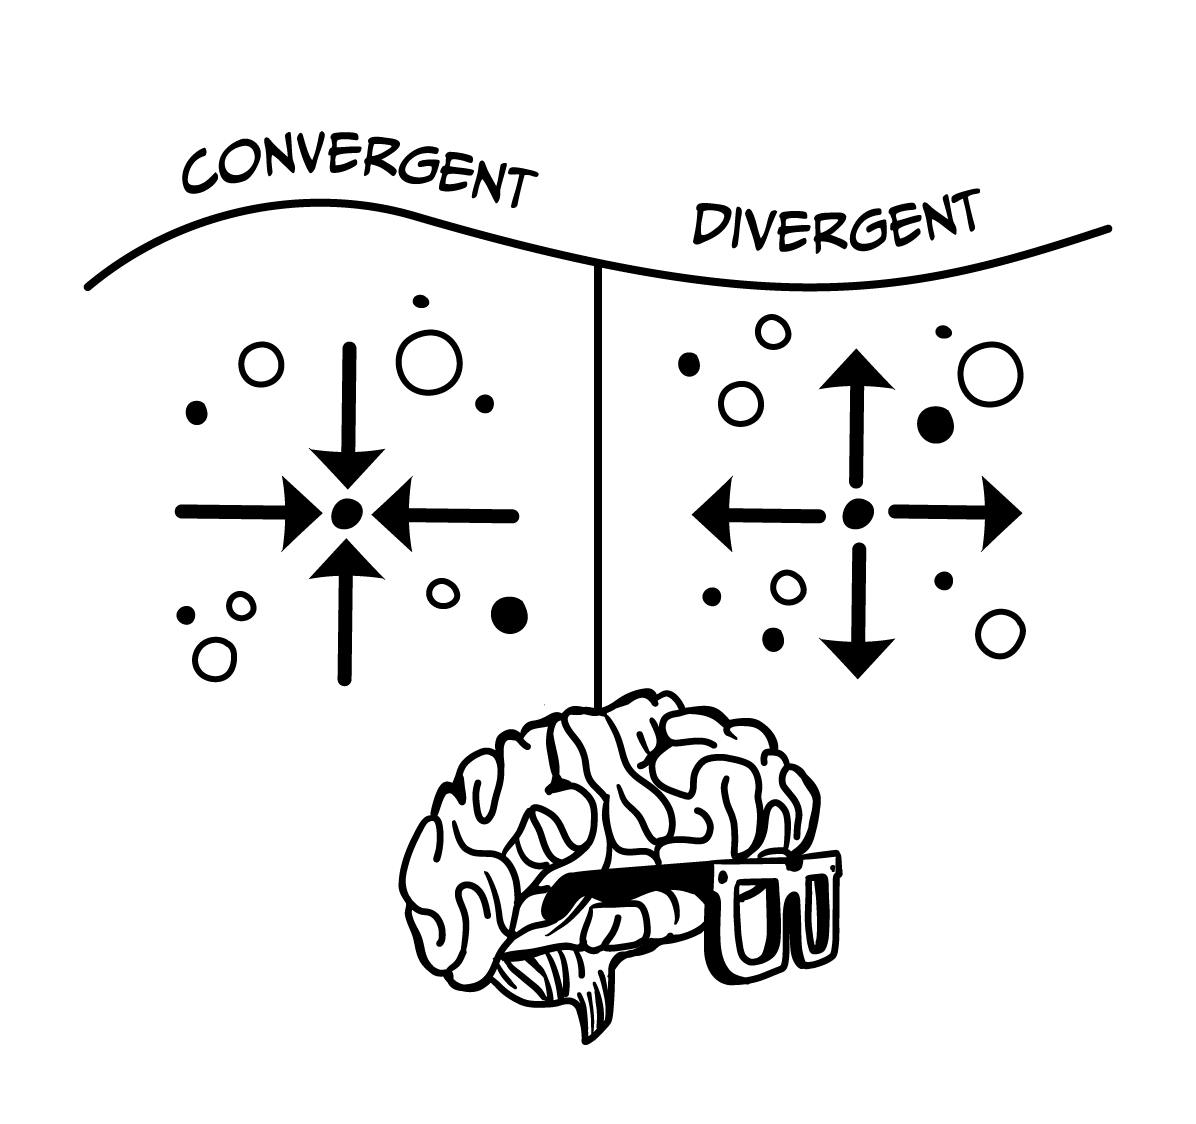 Convergent and Divergent thinking